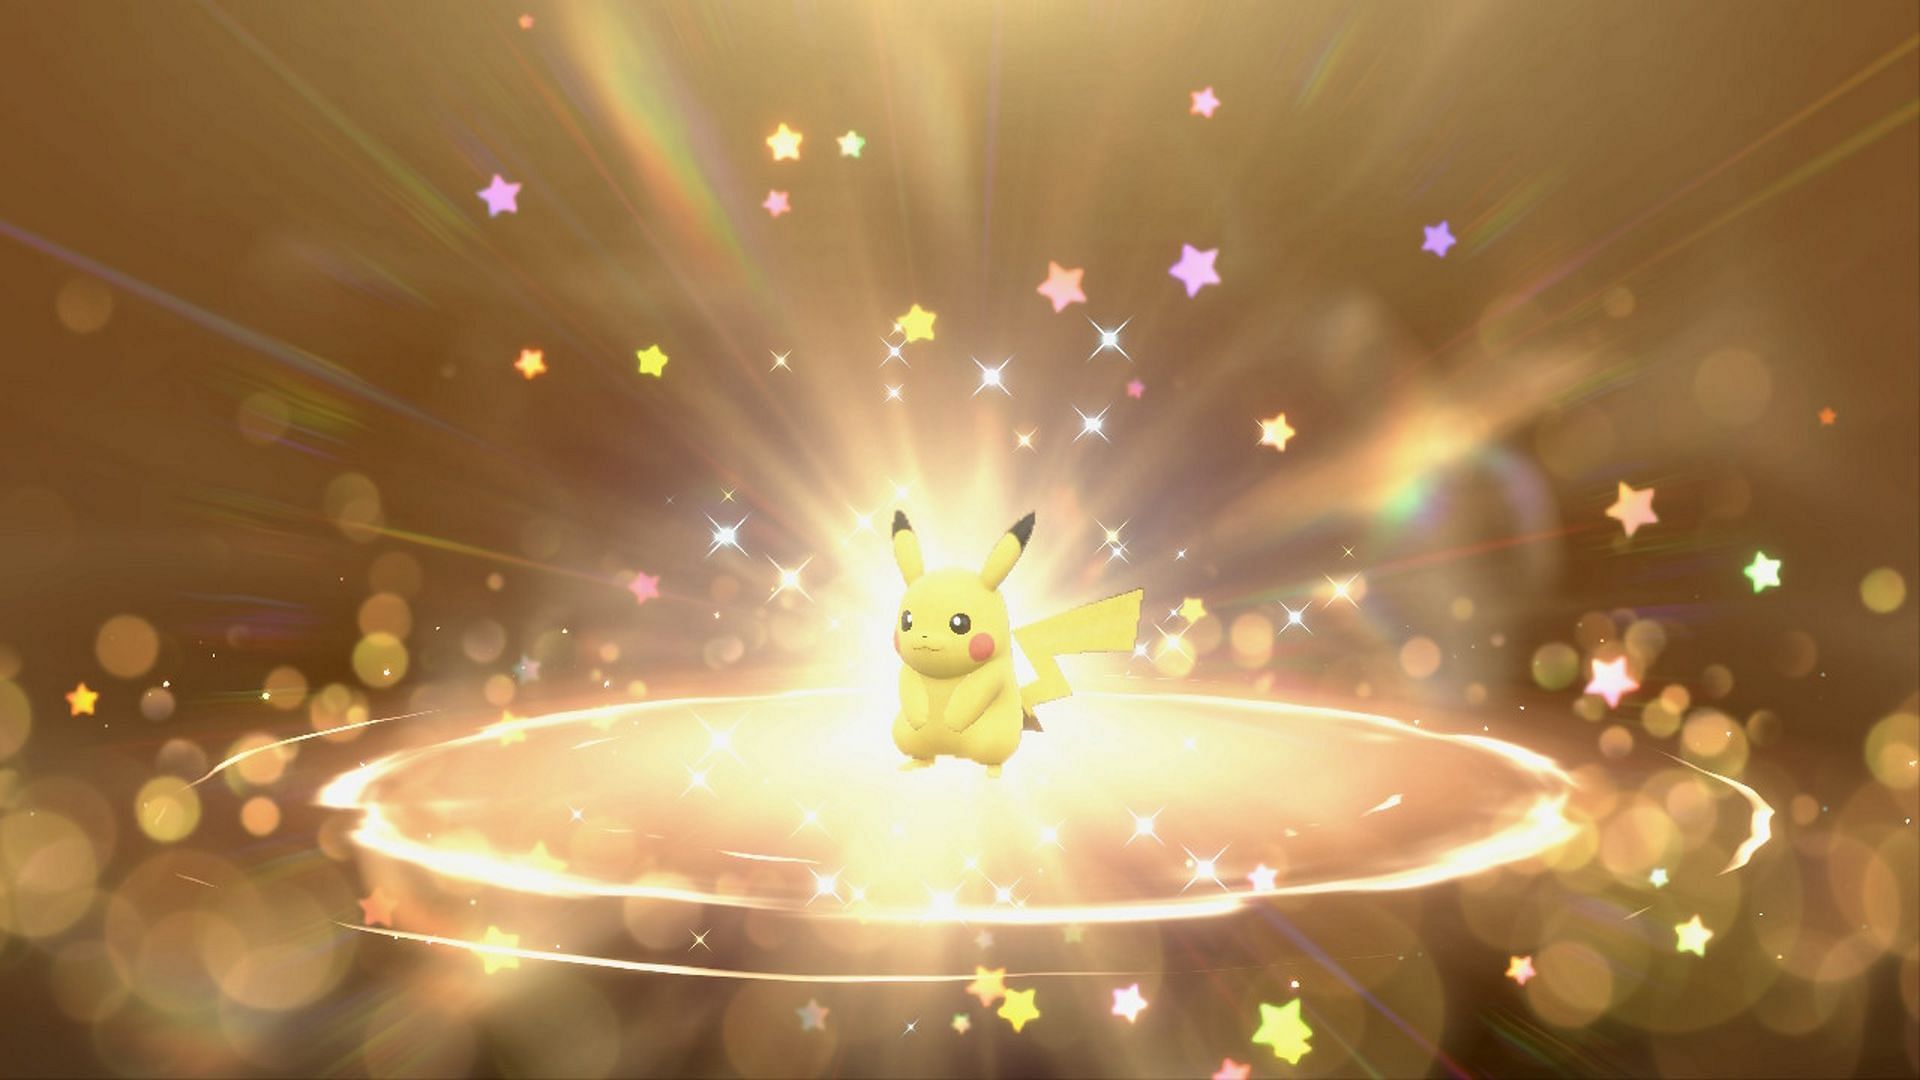 You should see a screen like this one when claiming the free Pikachu (Image via Game Freak)